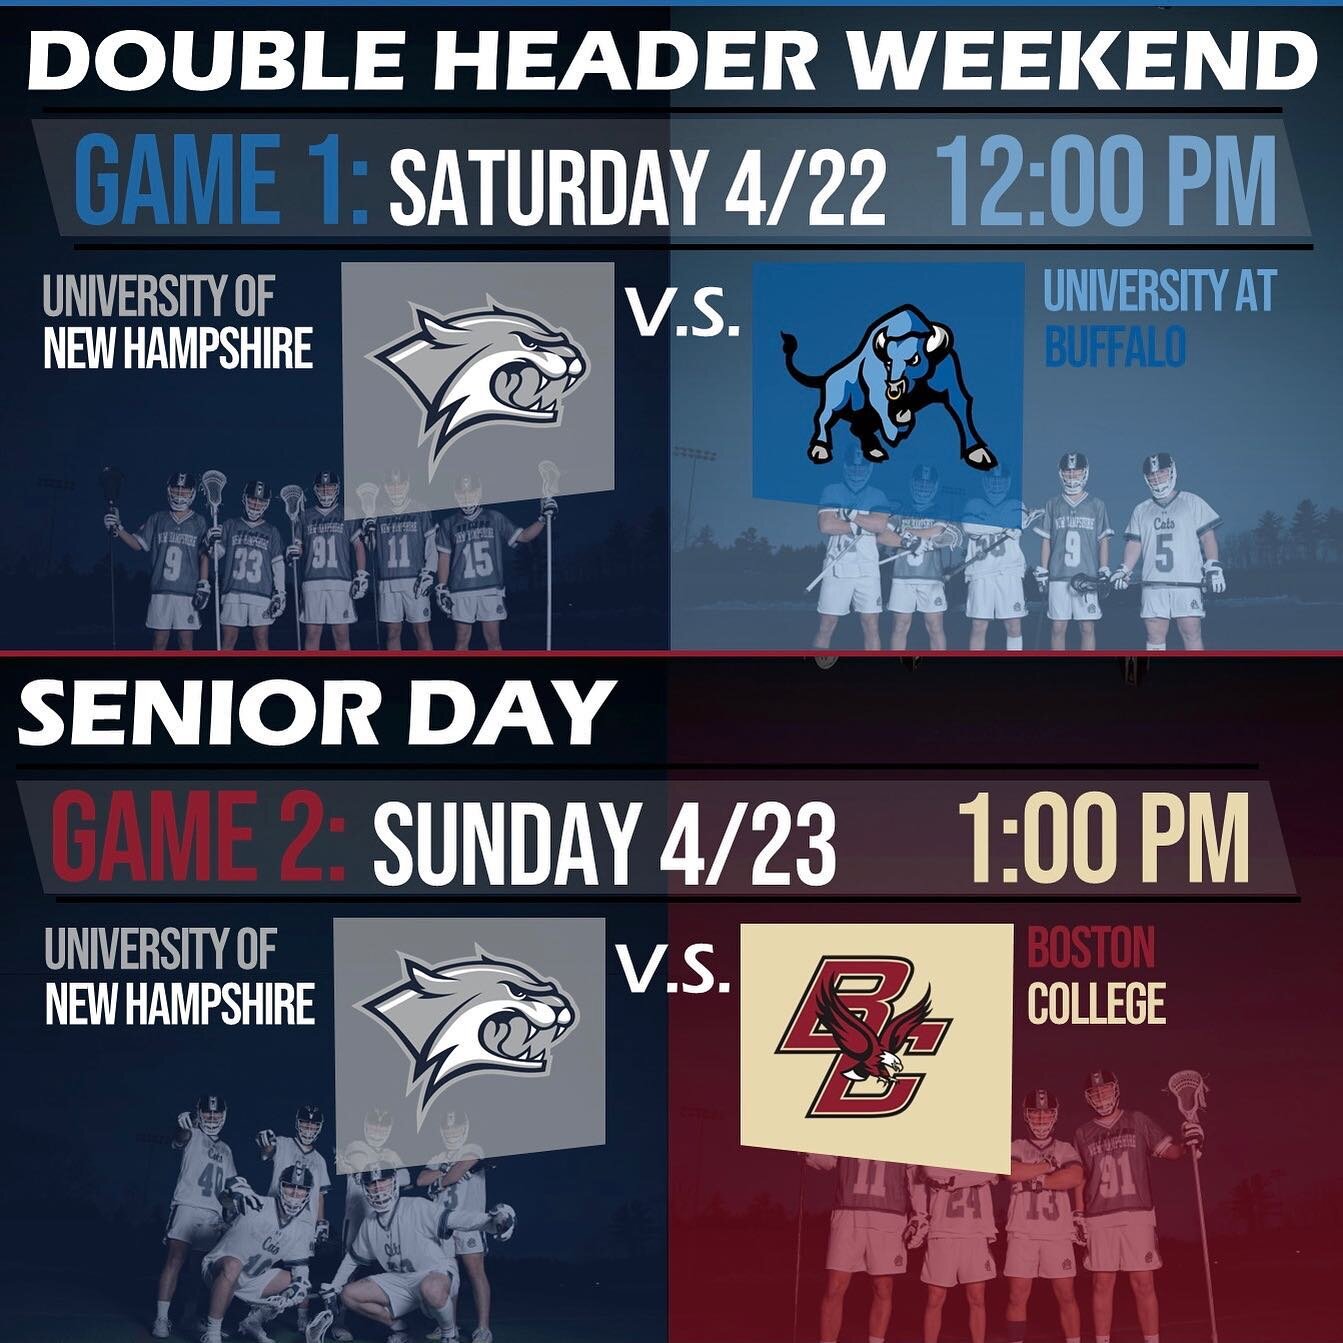 Join us this weekend for the final matchups of the regular season! #gocats